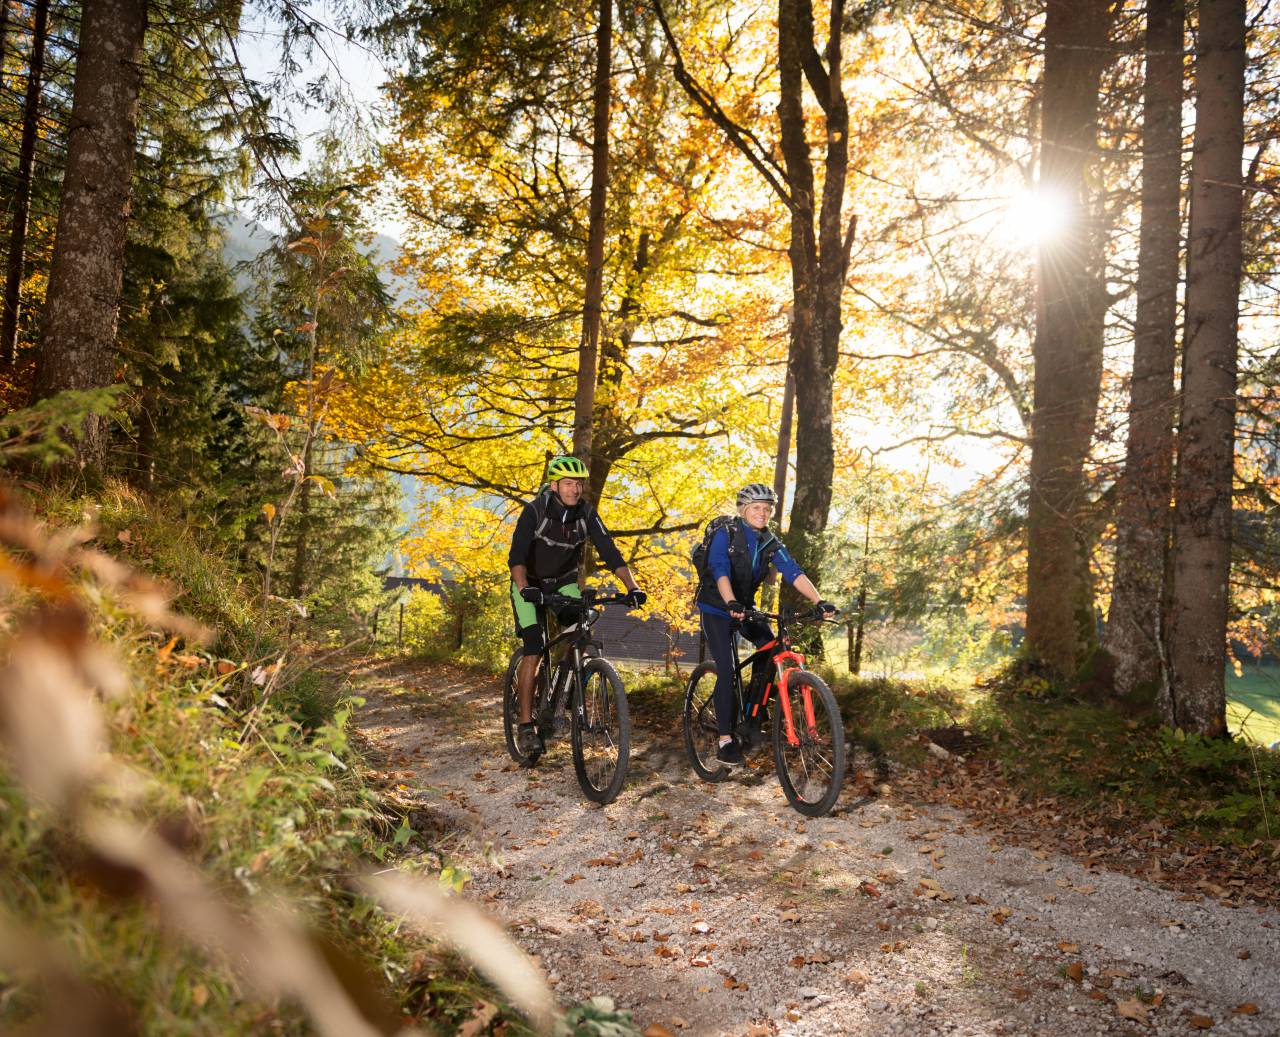 Cyclists with e-bikes on a forest path in autumn